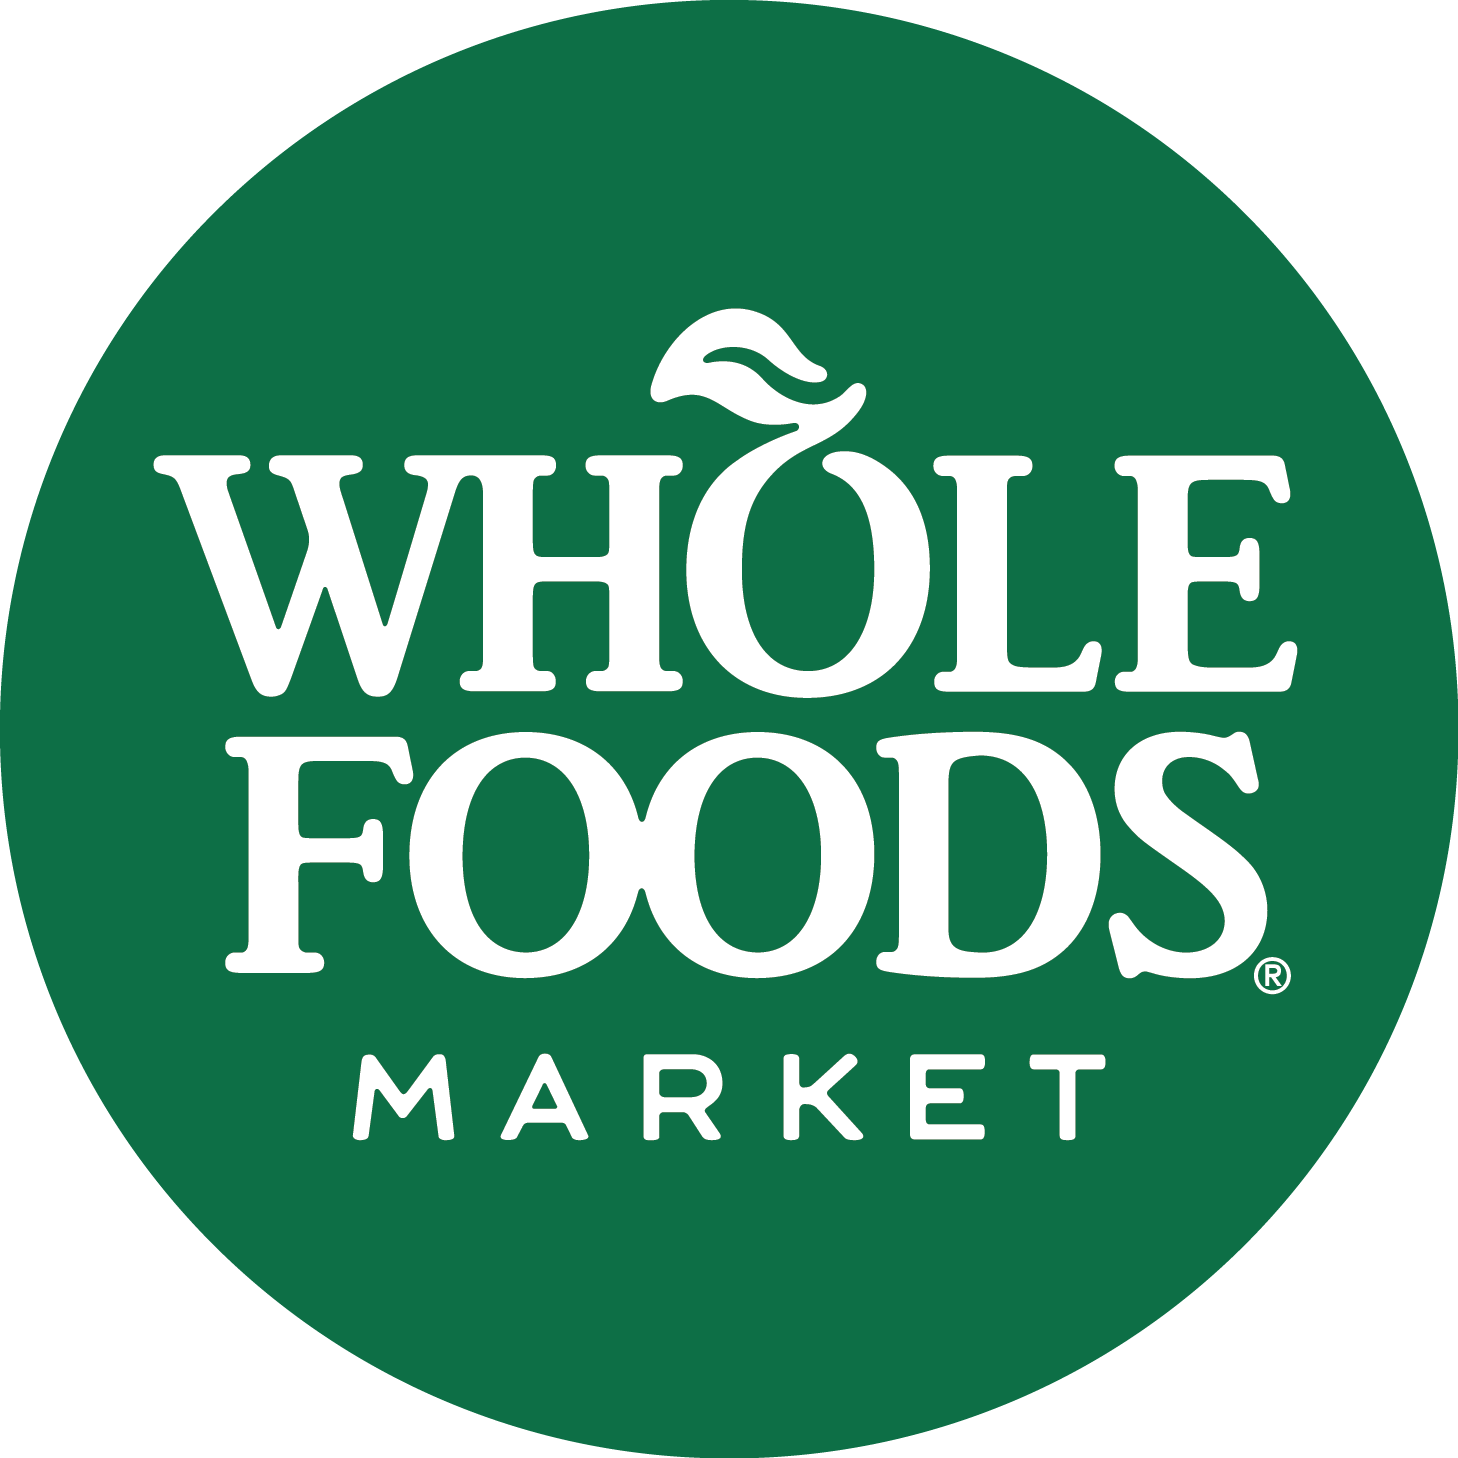 Whole Foods Market Festive Meal Ordering